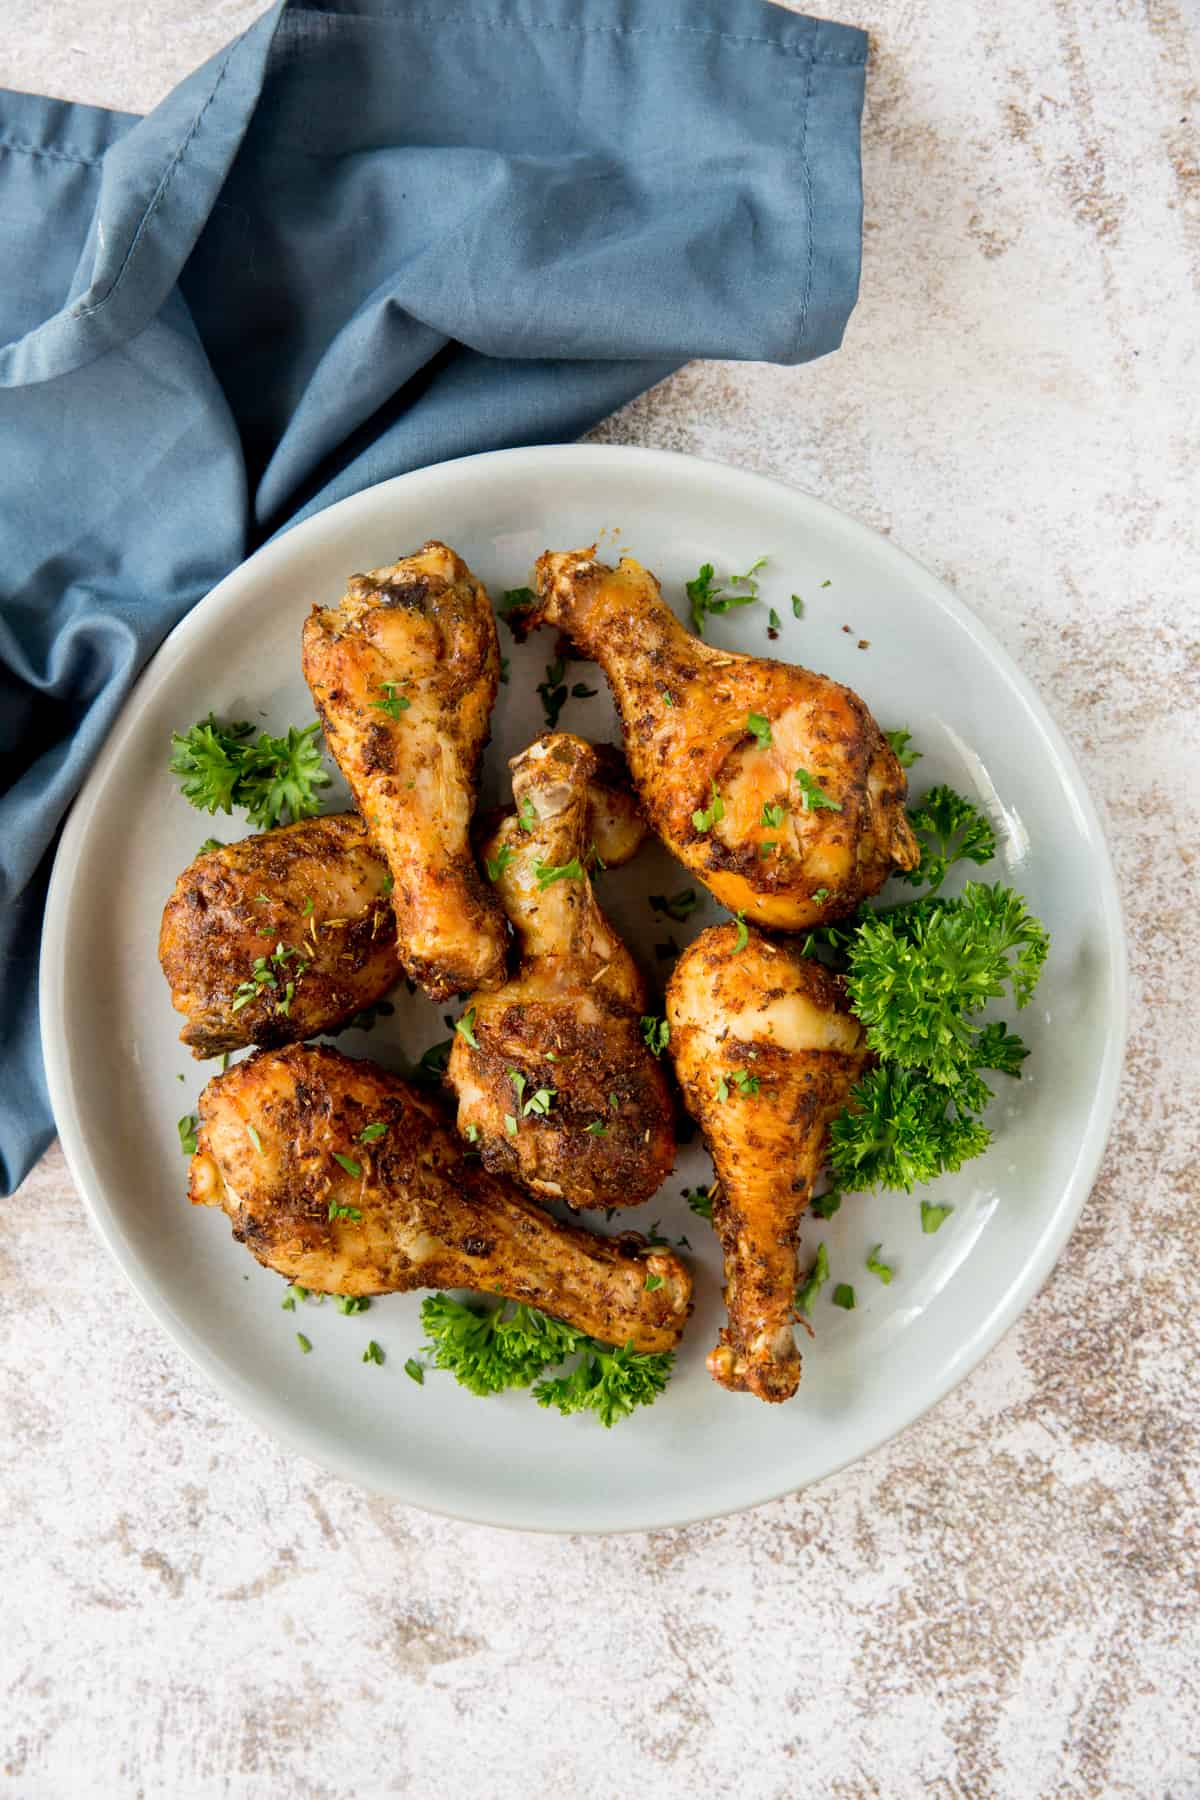 cooked chicken drumsticks on a plate garnished with parsley